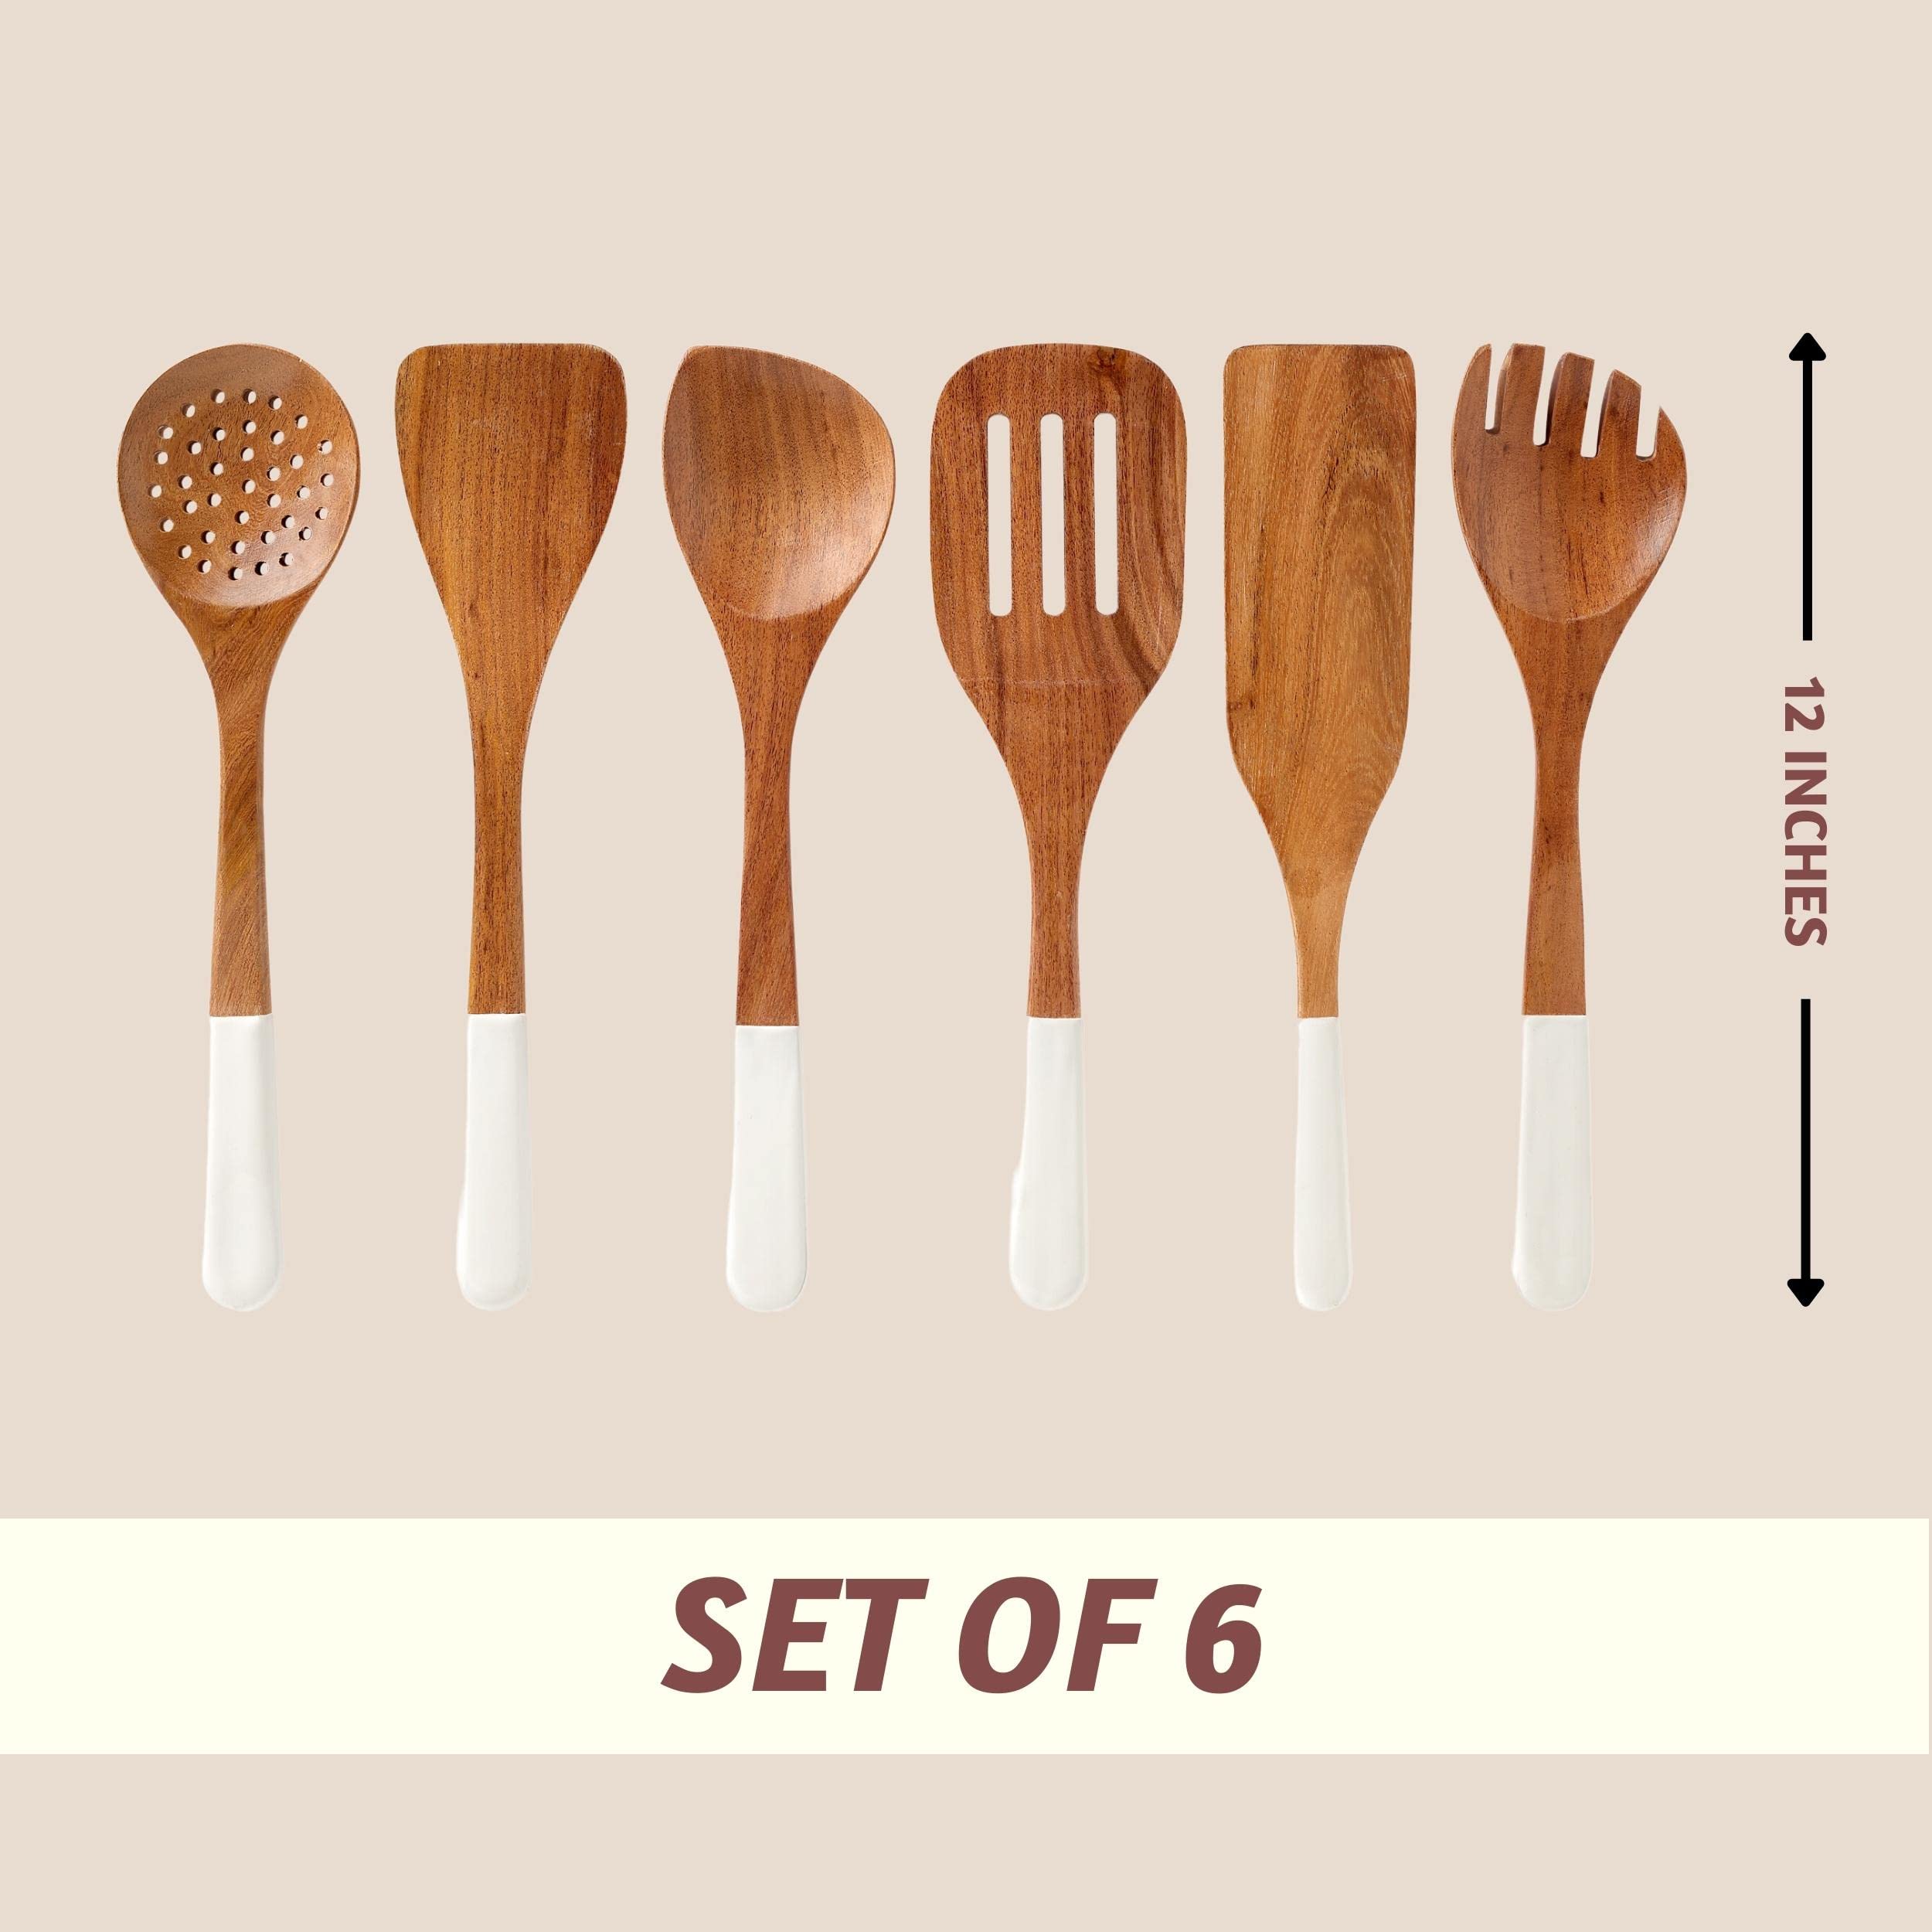 Folkulture Wooden Spoons for Cooking or Cooking Utensils Set, Set of 6 Wooden Cooking Spoons for Kitchen, Non-Stick Cookware Set or Wooden Spoon Set with Spurtle,Fork, Spatula and Strainer (White)